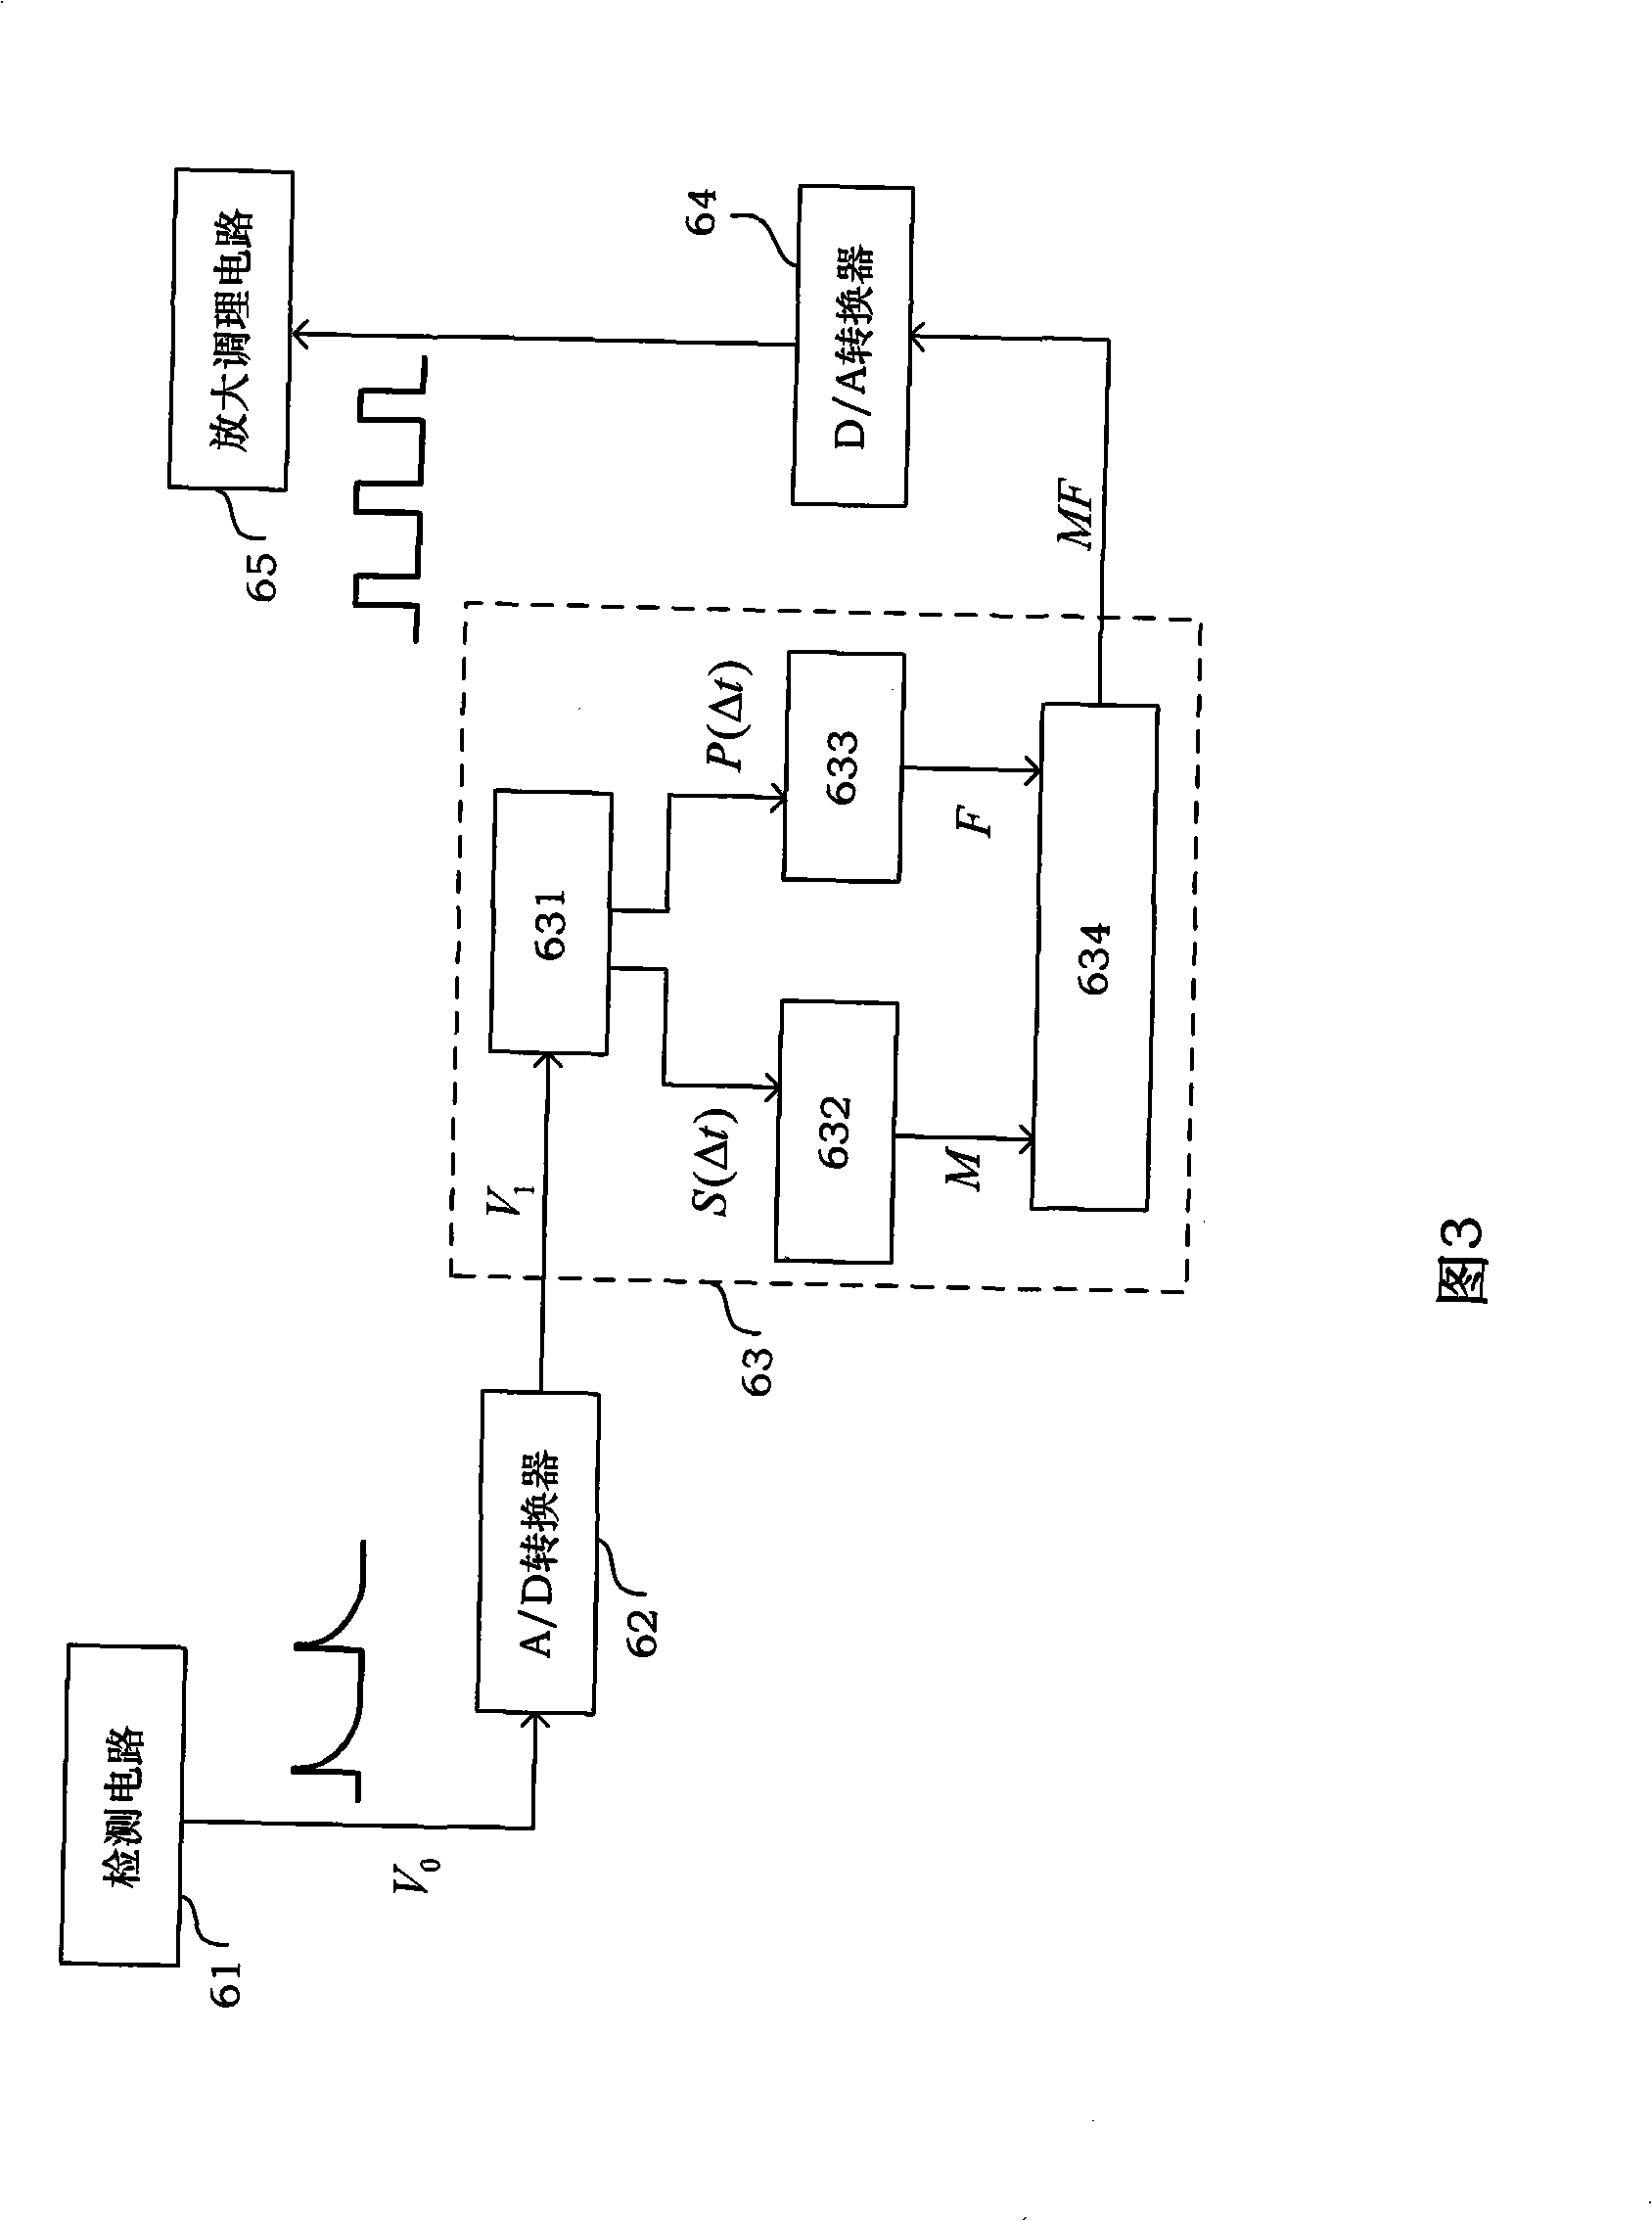 System for measuring interfere type optic fiber gyroscope eigenfrequency and half-wave voltage adopting square wave modulation